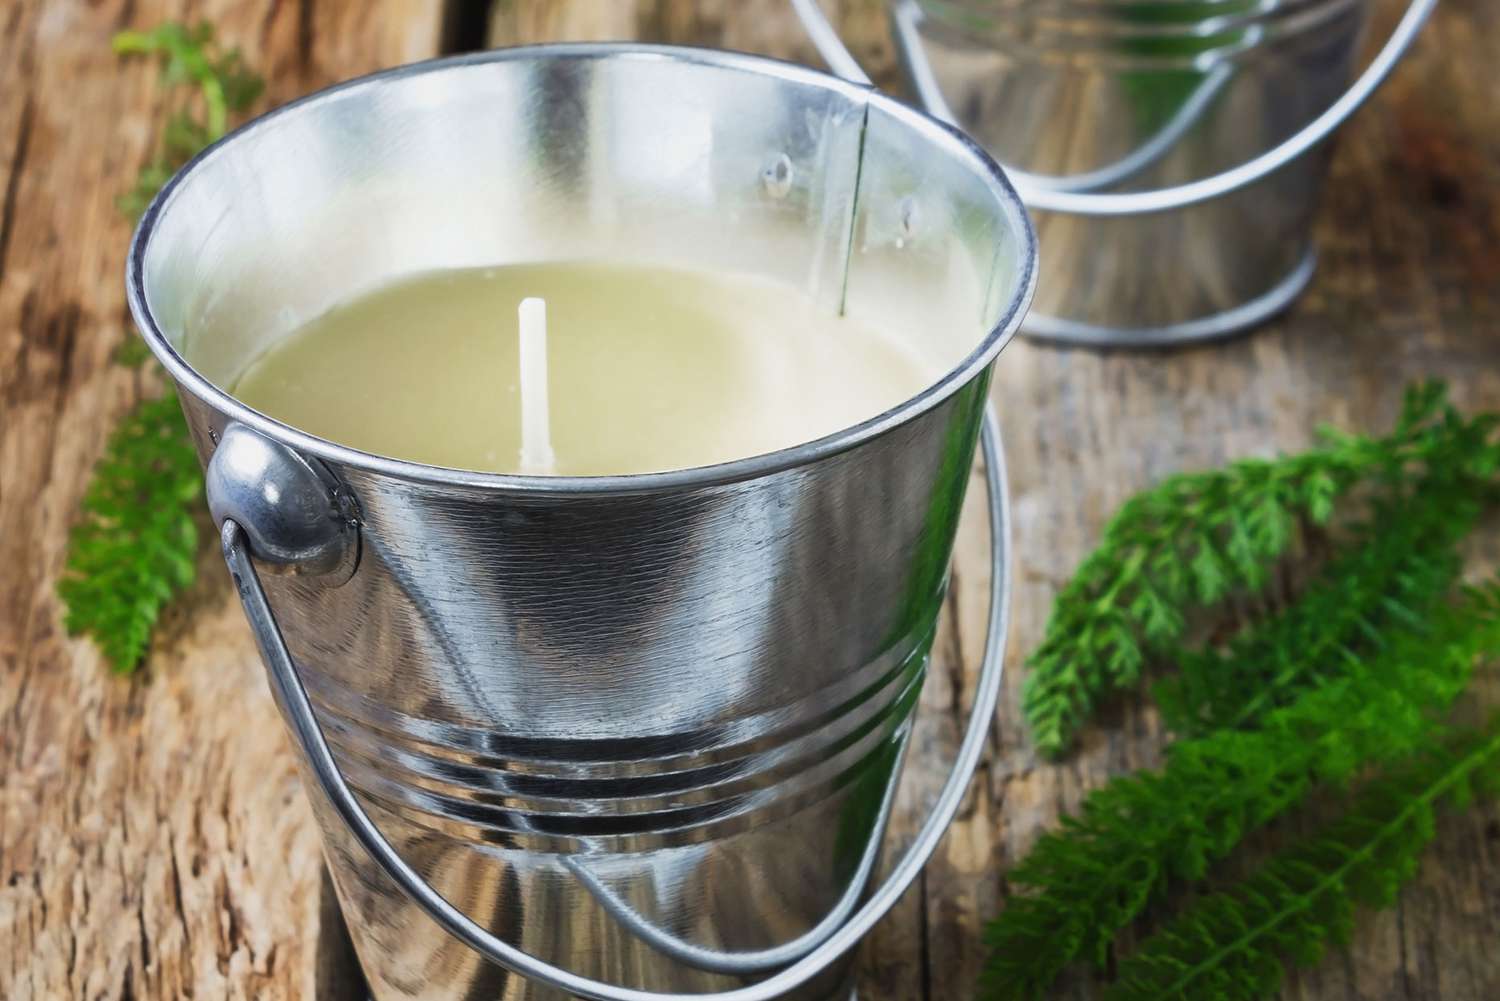 How To Make Homemade Citronella Candles